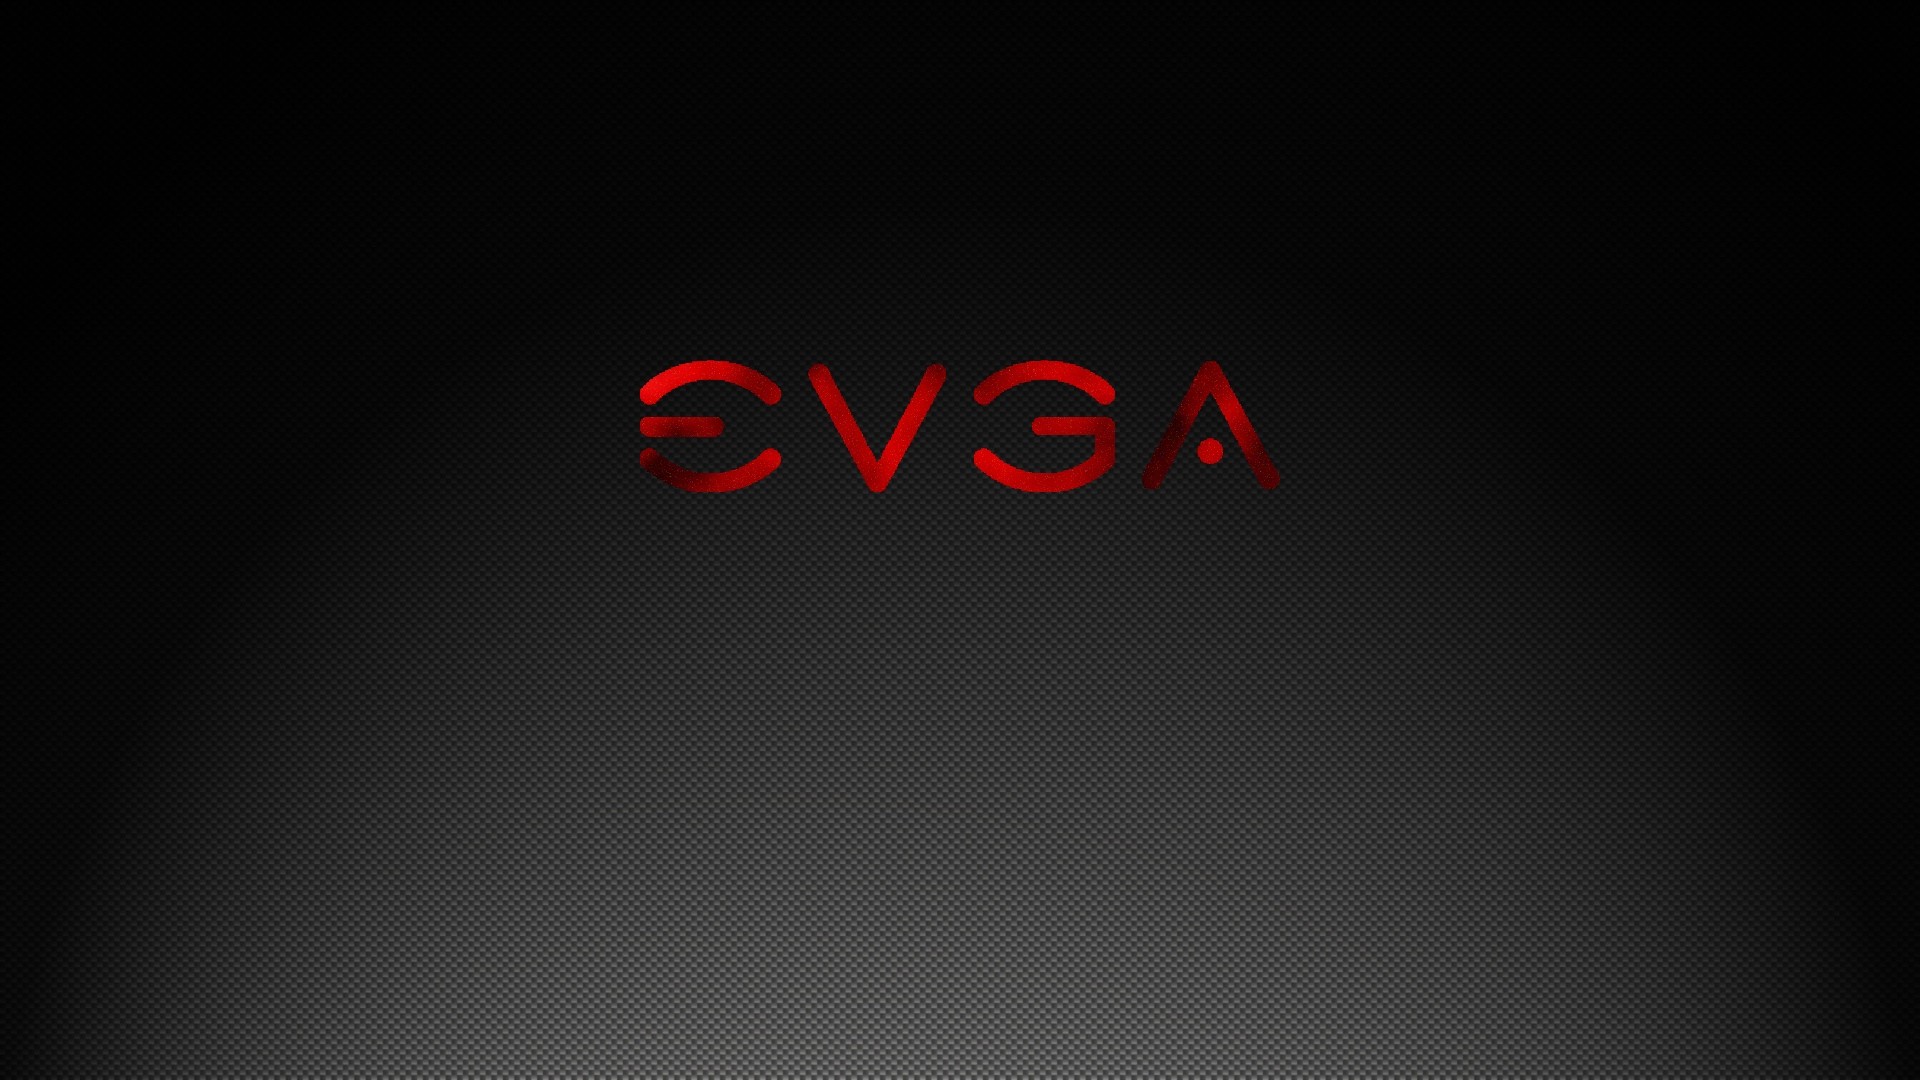 Nice Images Collection: EVGA Desktop Wallpapers